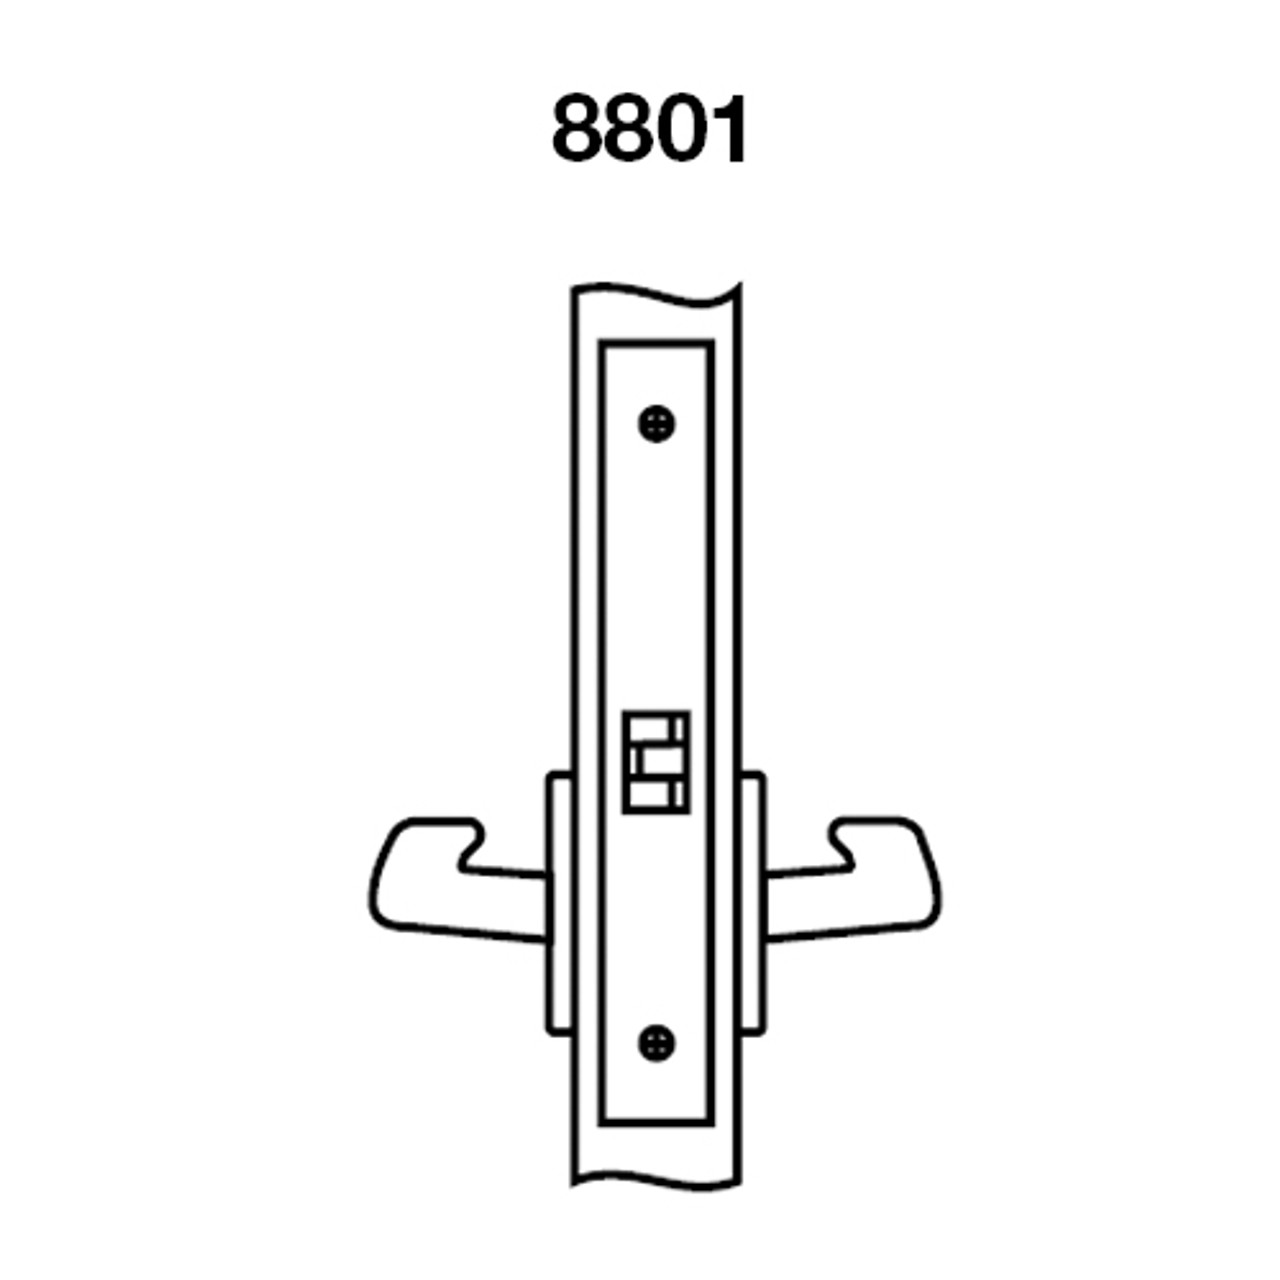 PBCN8801FL-618 Yale 8800FL Series Non-Keyed Mortise Passage Locks with Pacific Beach Lever in Bright Nickel